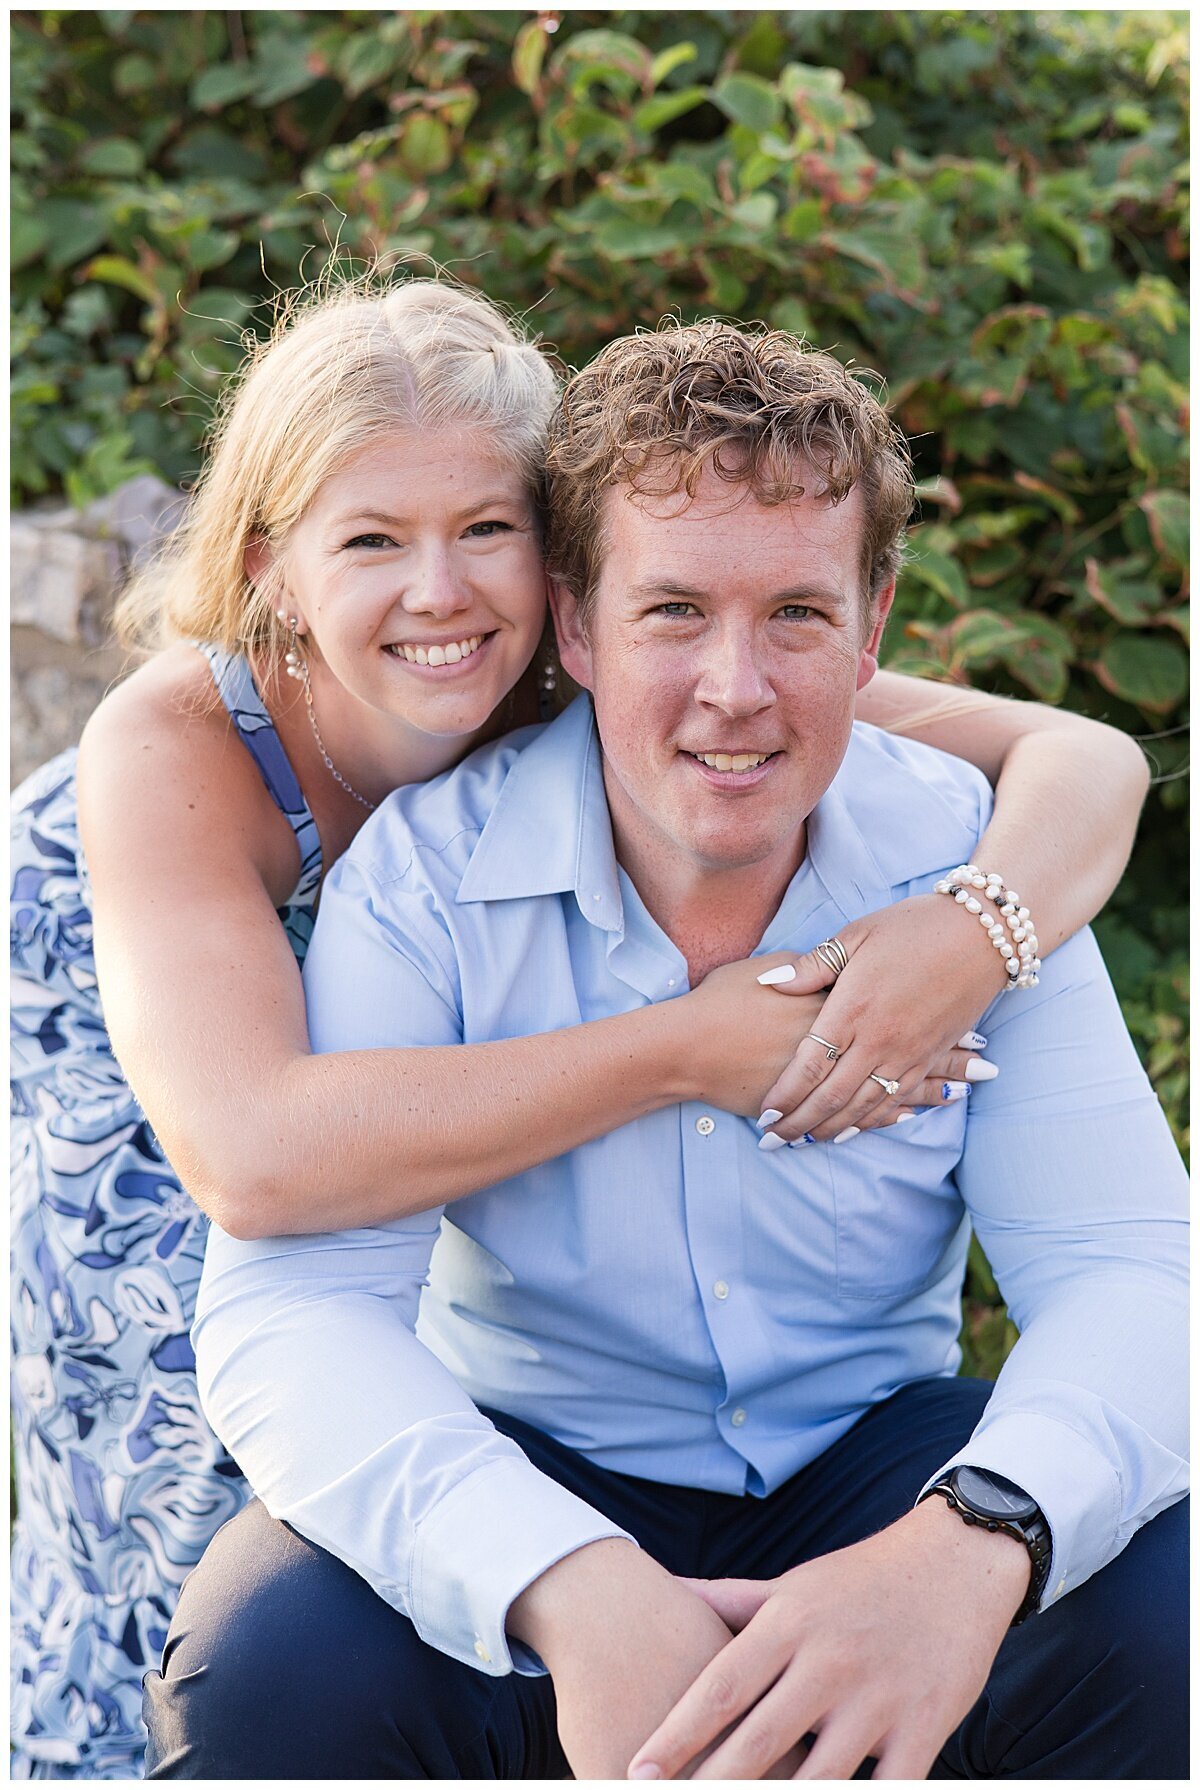 Lorie-Lyn Photography - Family Massachusetts Photography - Westport MA- Engagement Session_0022